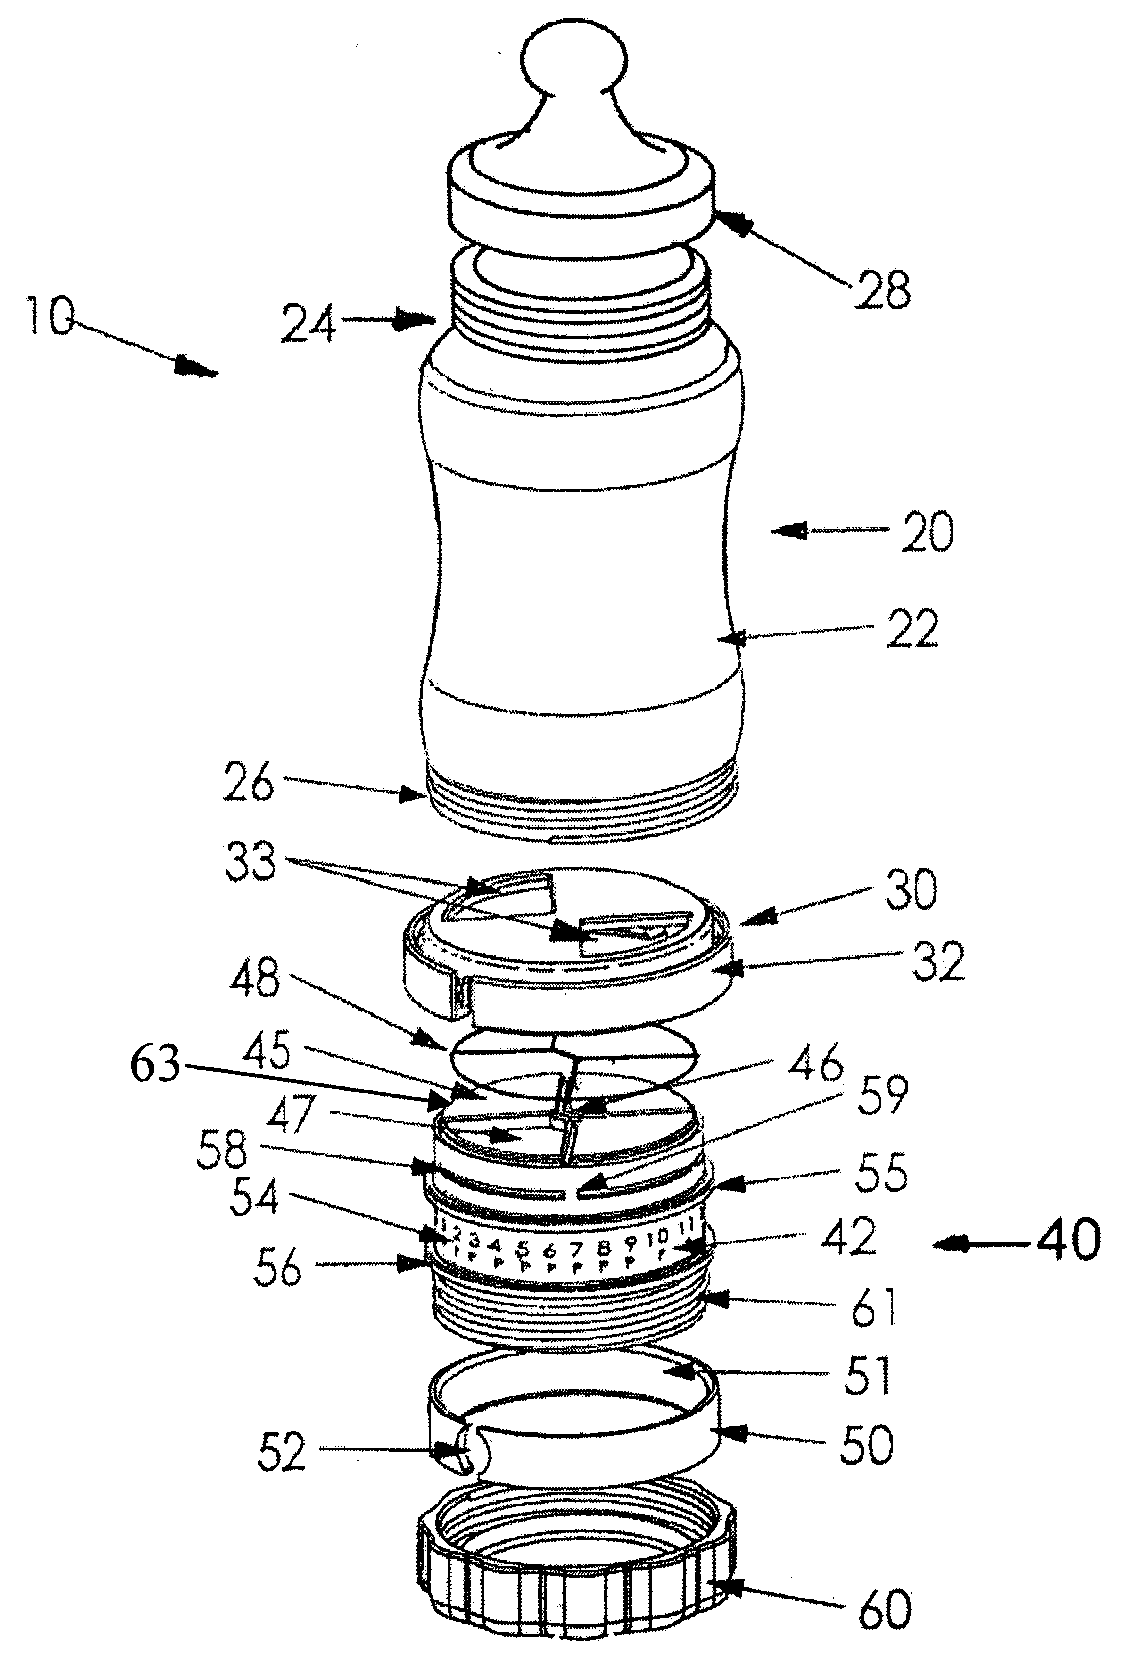 Stacked-container reusable bottle, system and method providing flexible use and mixing